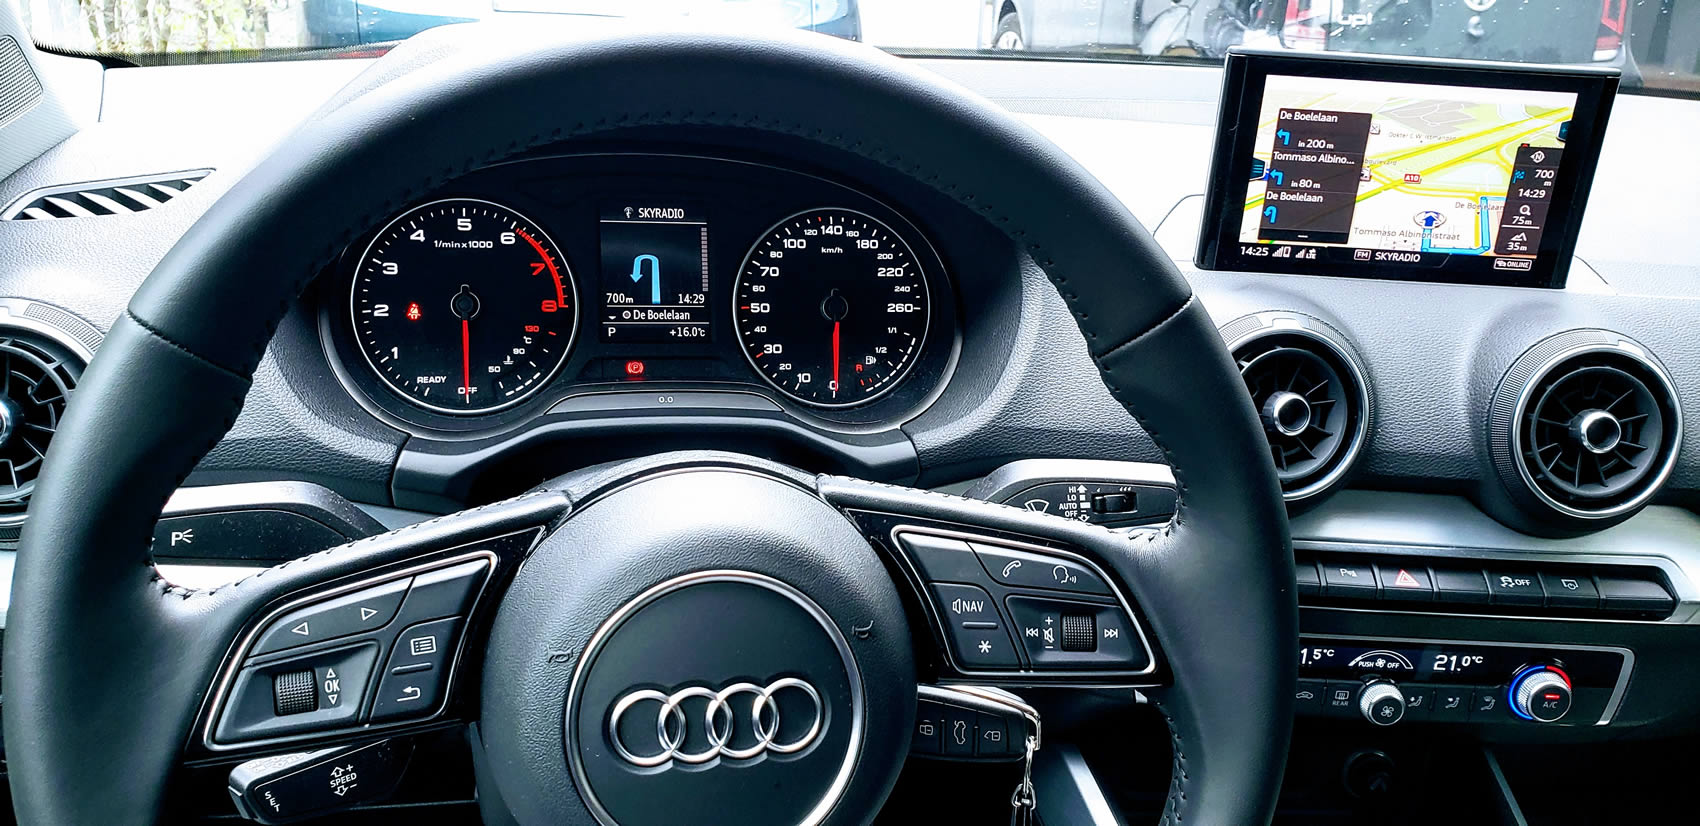 Audi Q2 in Canada? Test-driving the All-new Crossover: Dashboard